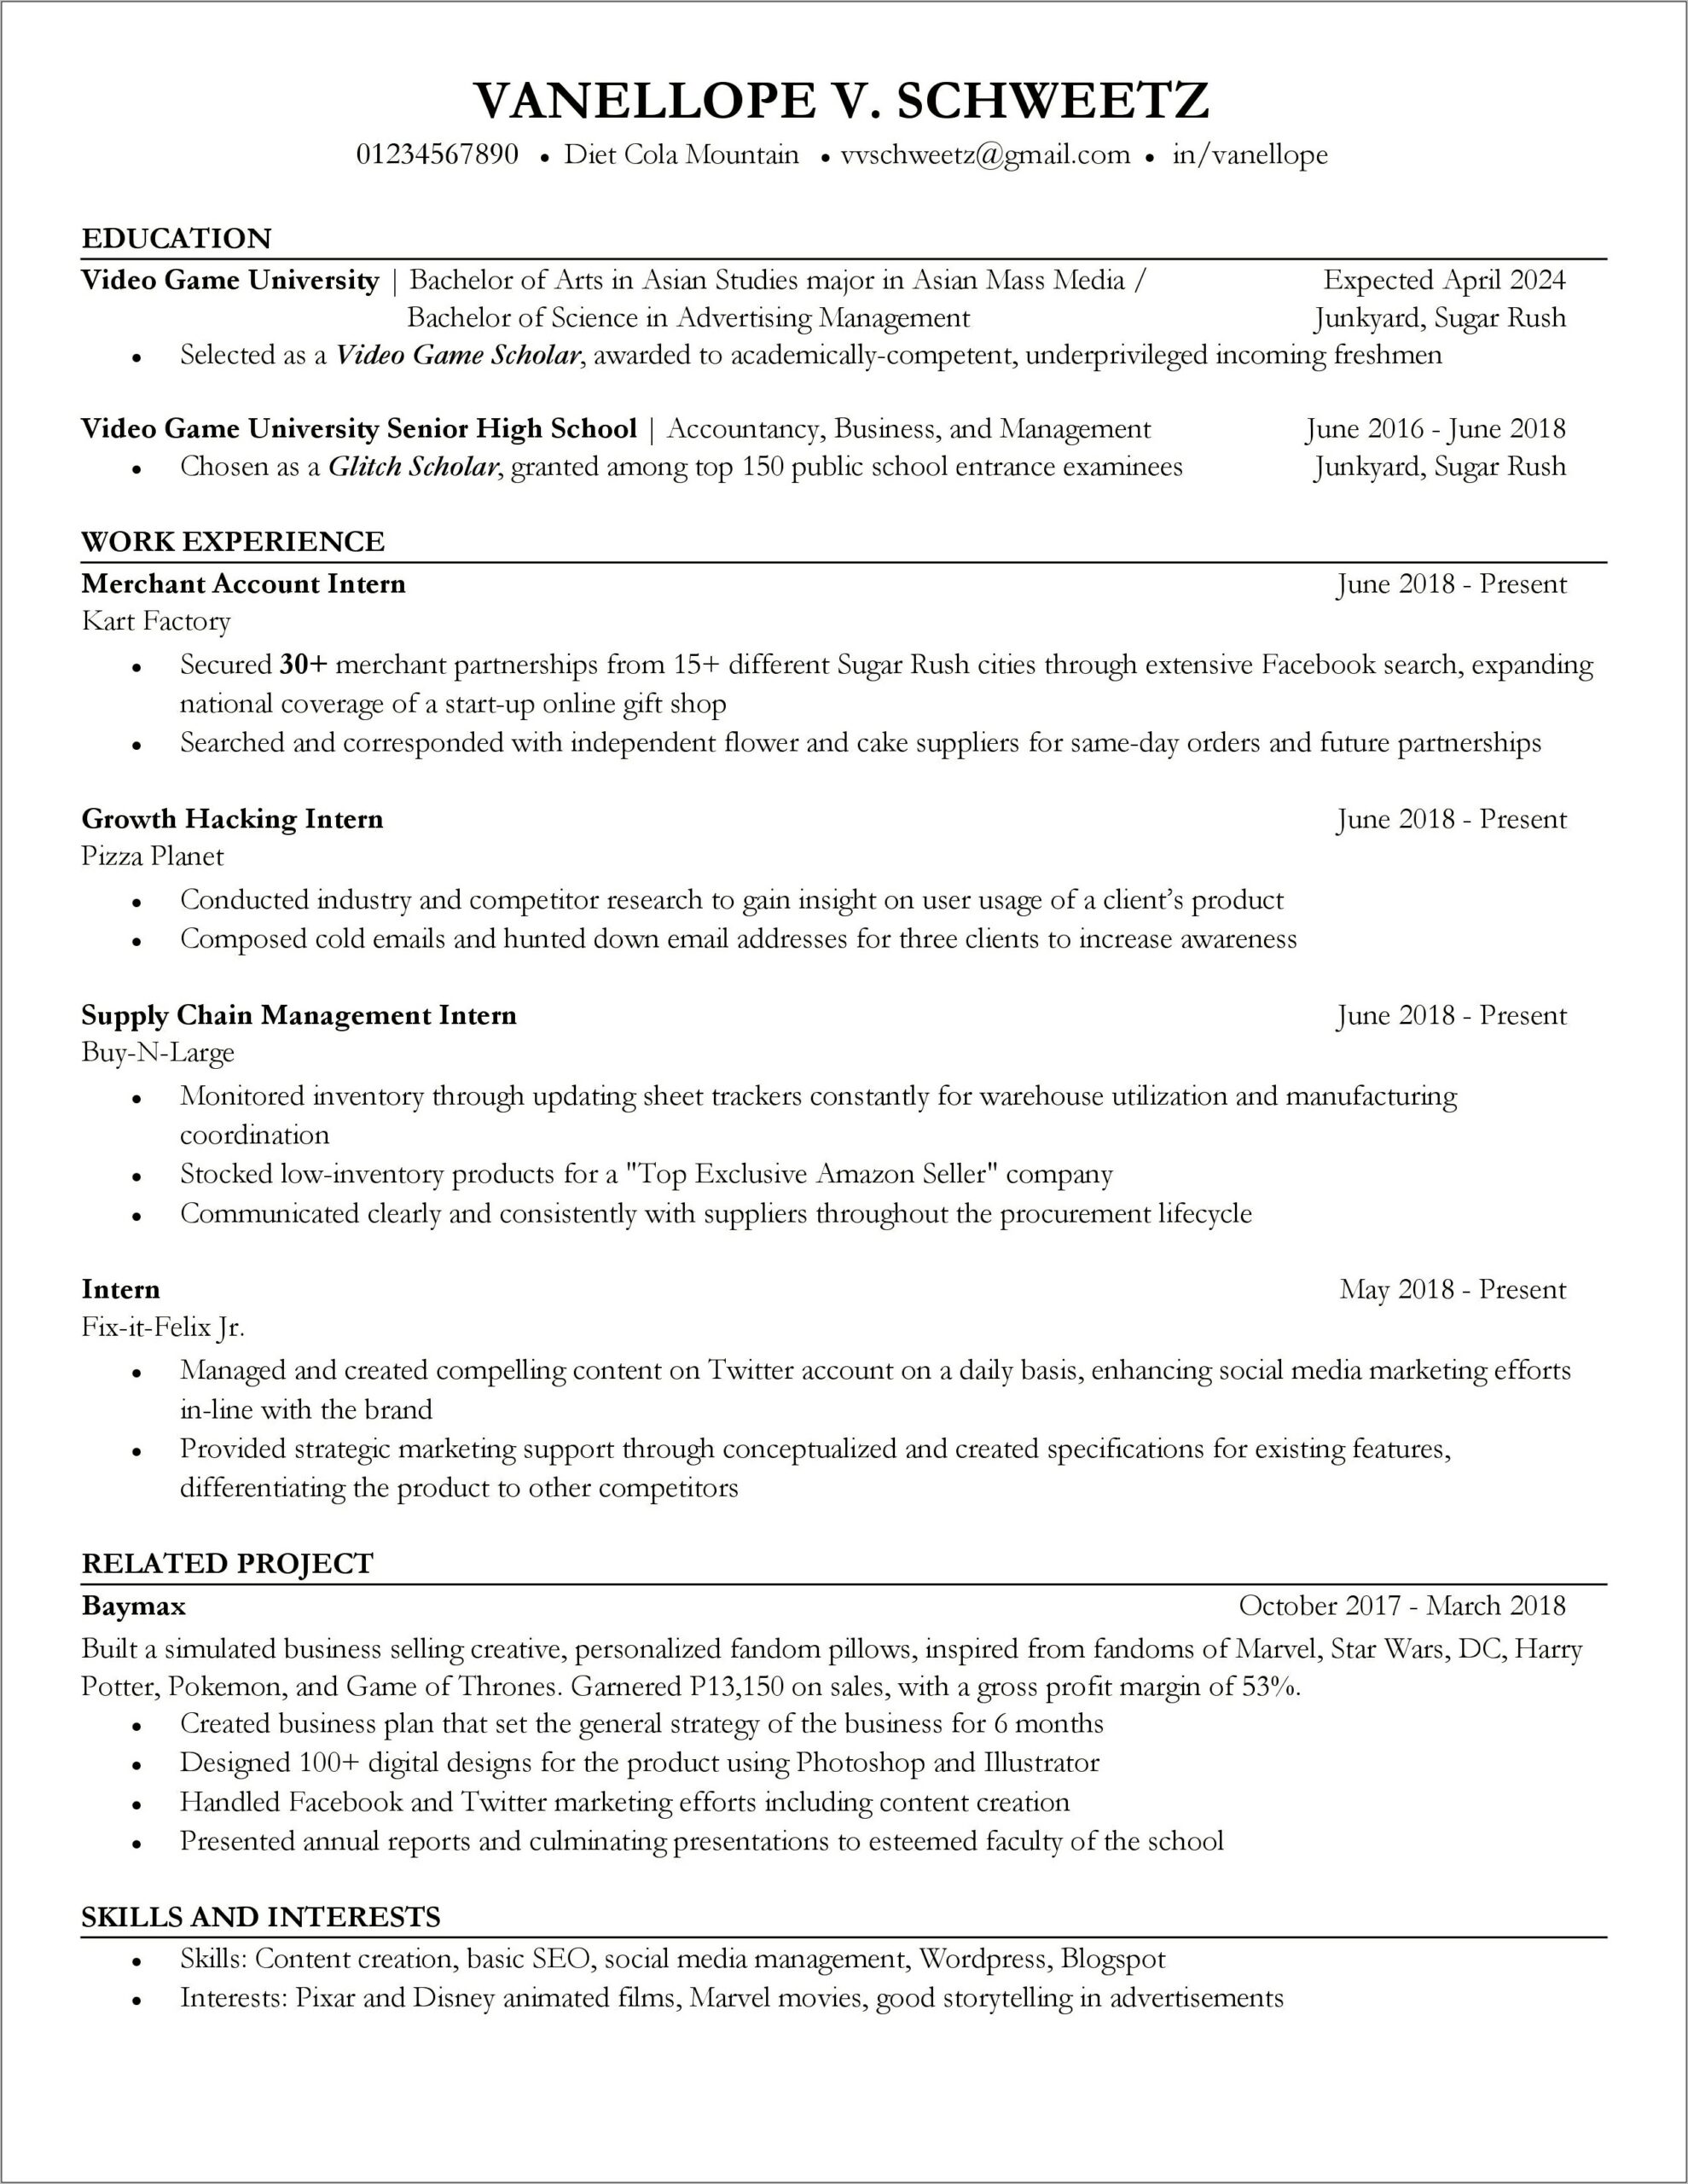 Put Project Date As Present In Resume Reddit